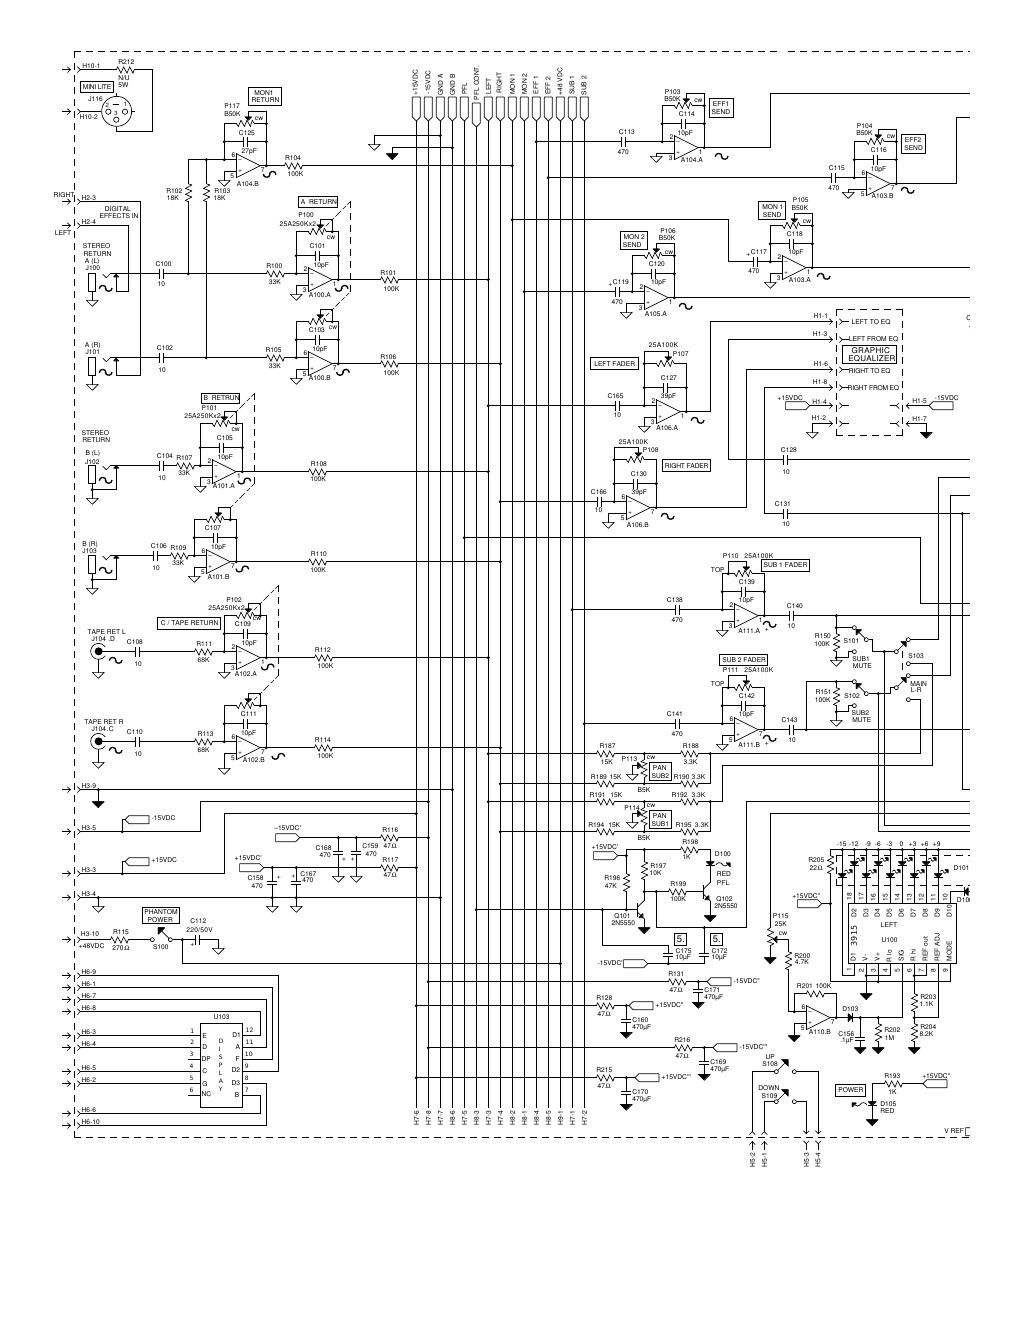 carvin 1642 mixer system schematic